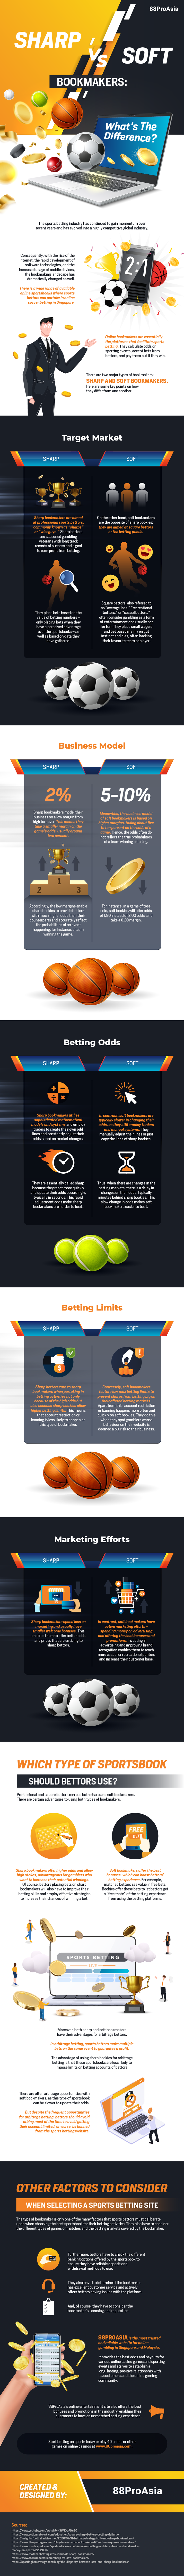 Sharp-vs-Soft-Bookmakers_Whats-The-Difference-singapore-sports-bet-Malaysia-infographic